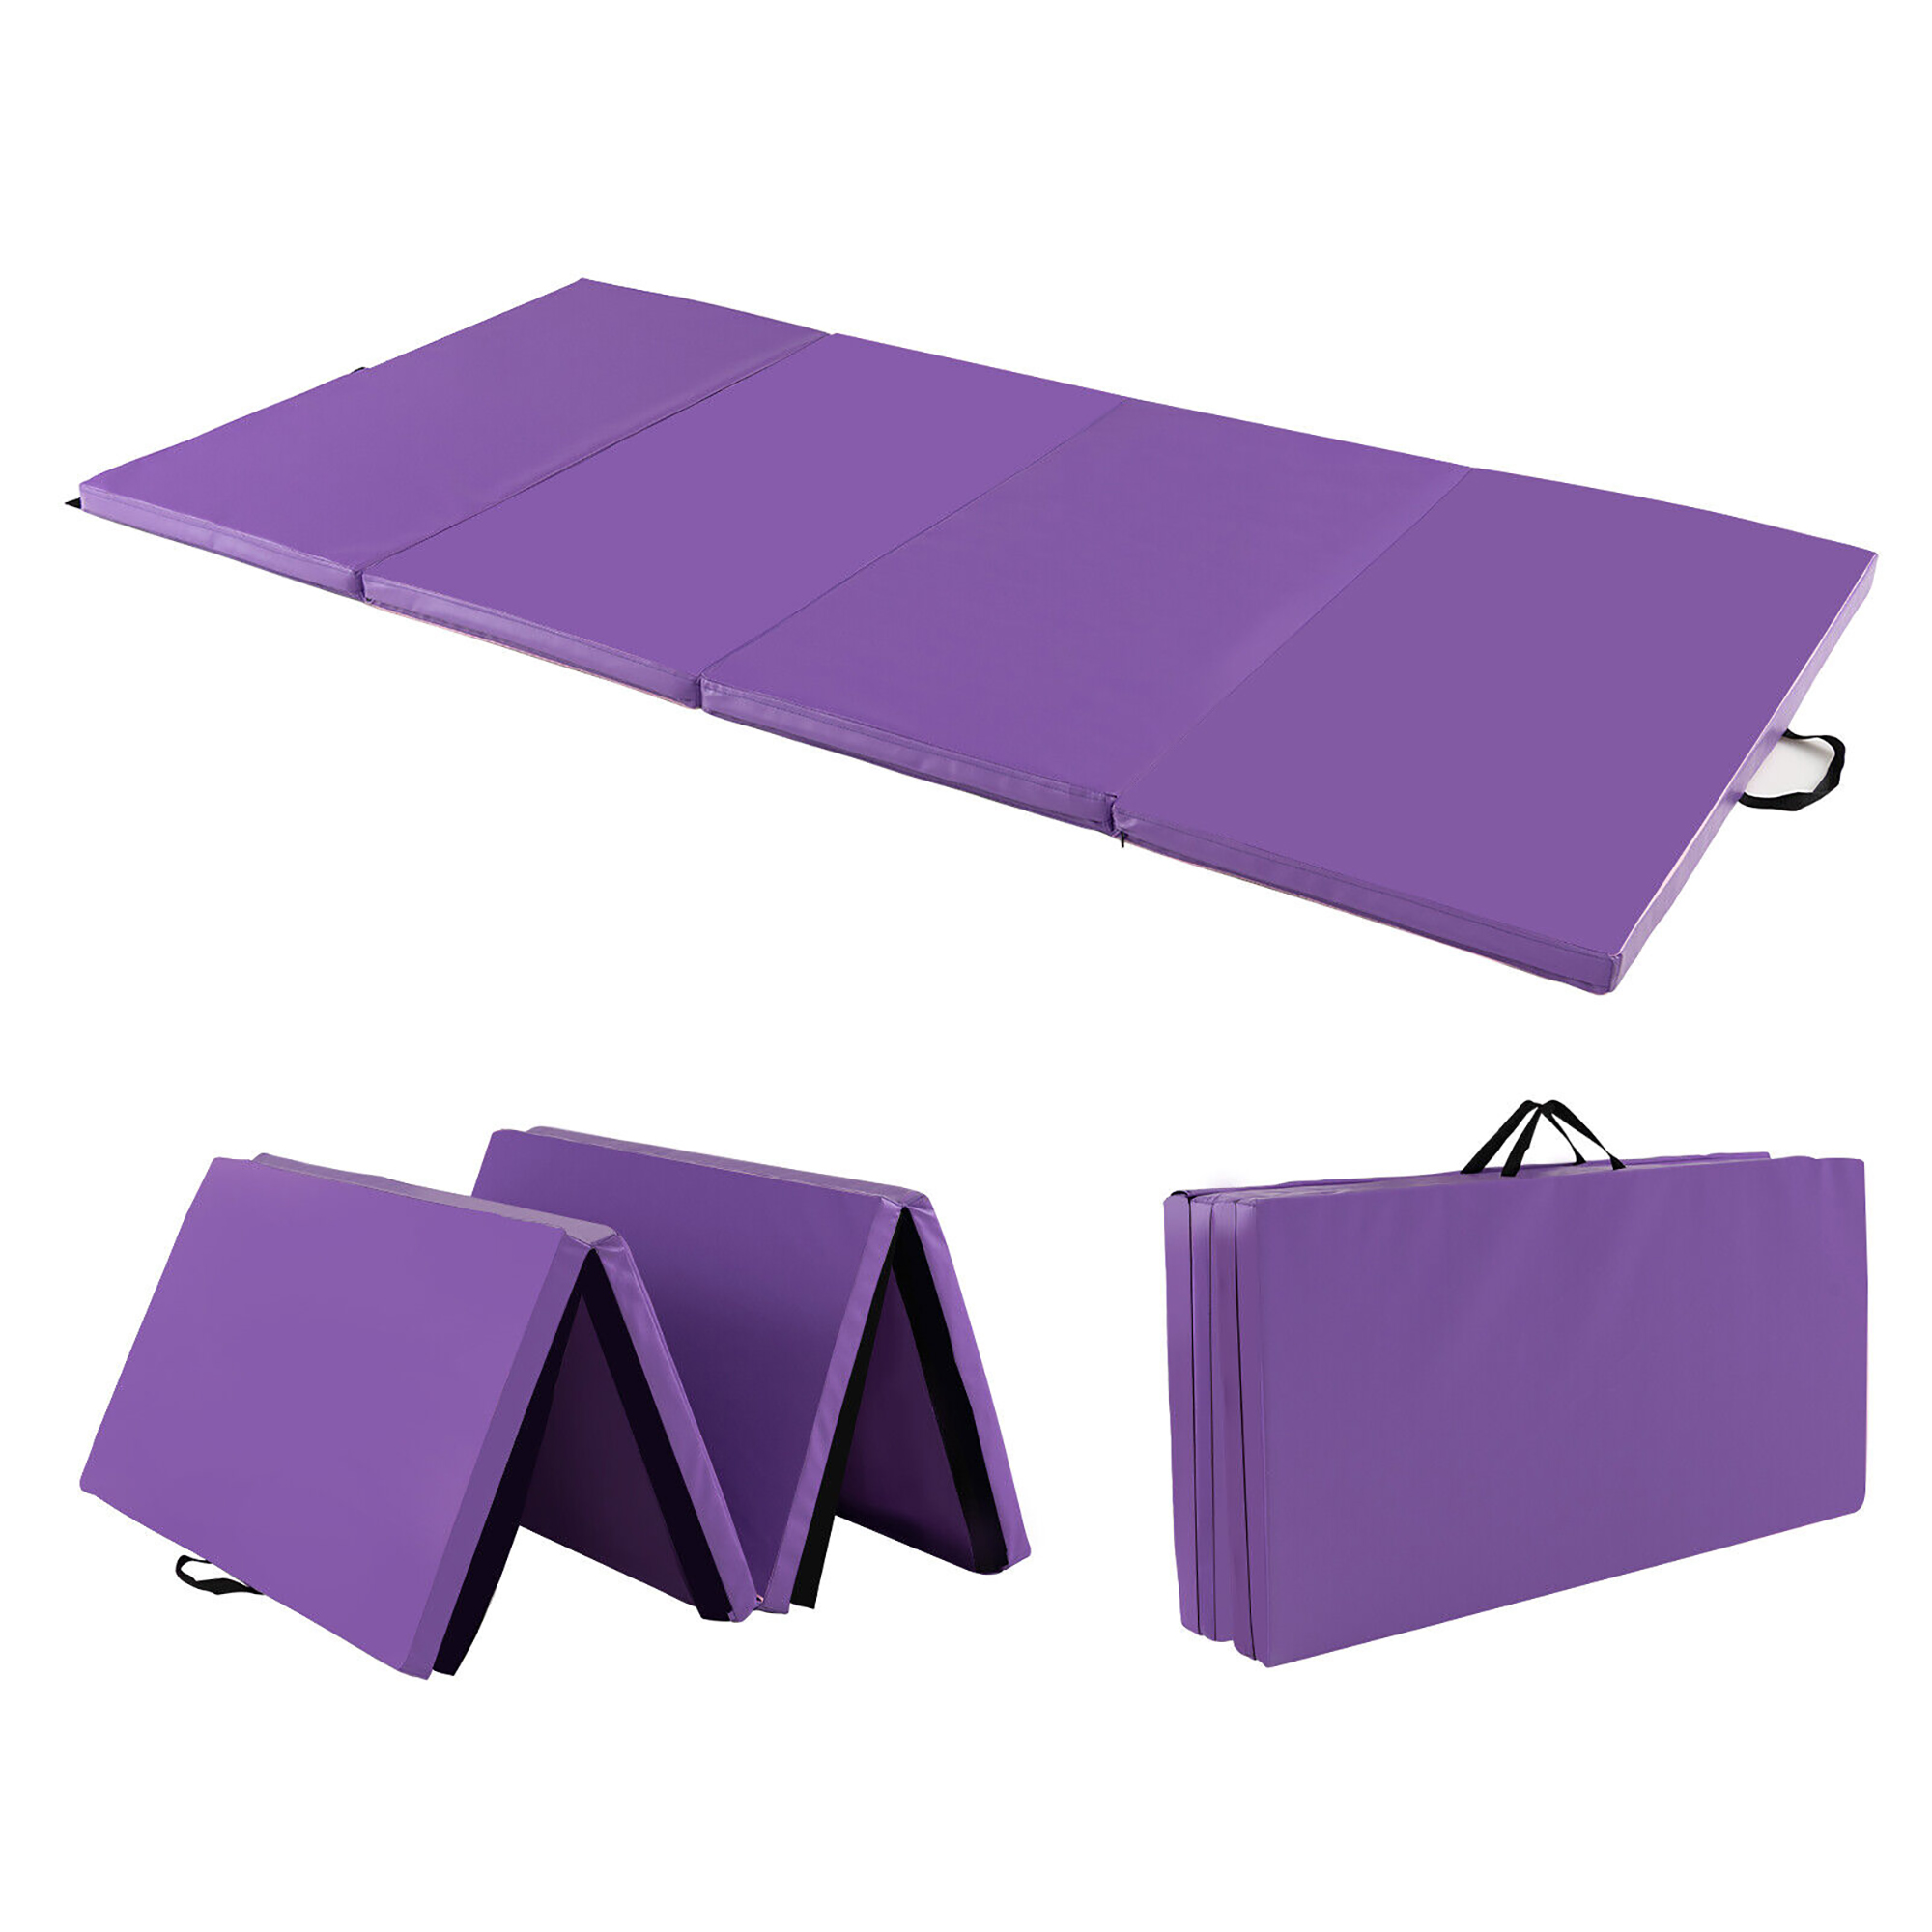 Gymax 8' x 4' x 2'' Folding Gymnastics Mat Tumbling Exercise PU Leather Cover for Yoga